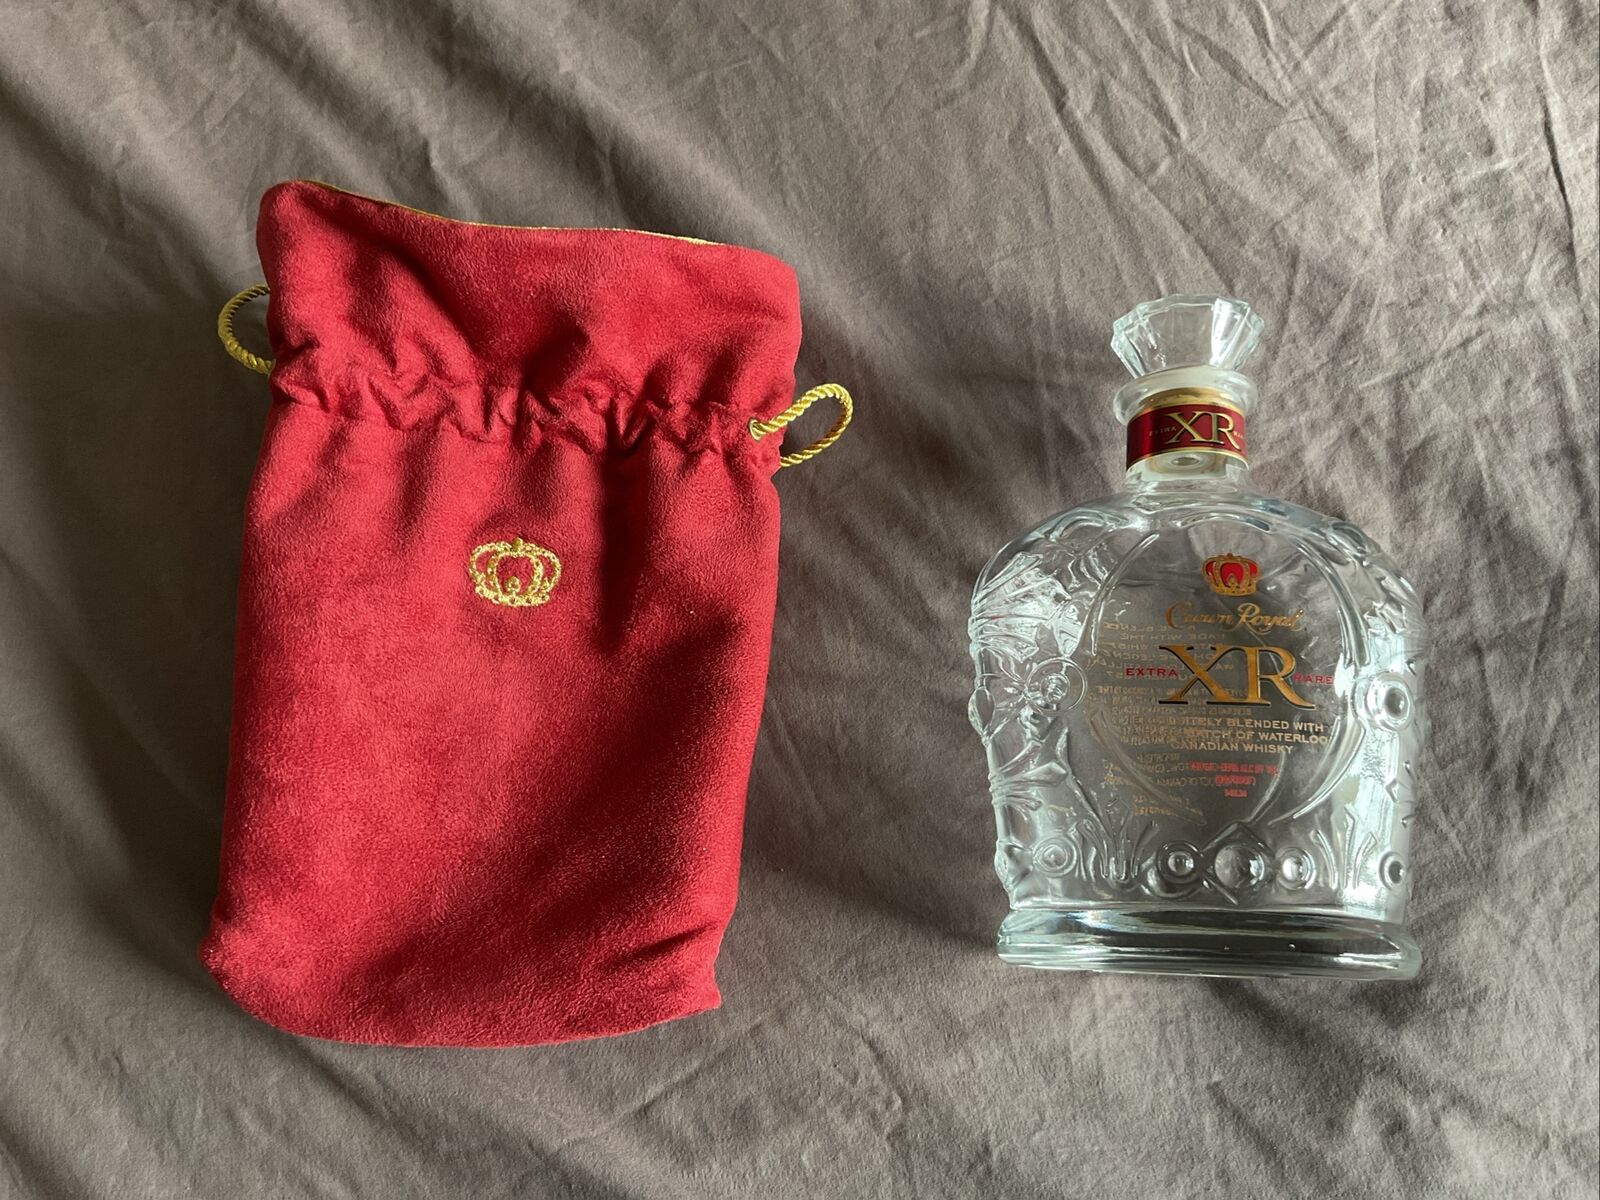 Crown Royal XR RED Waterloo Extra Rare Red Bag Bottle & Cork Canadian Whisky